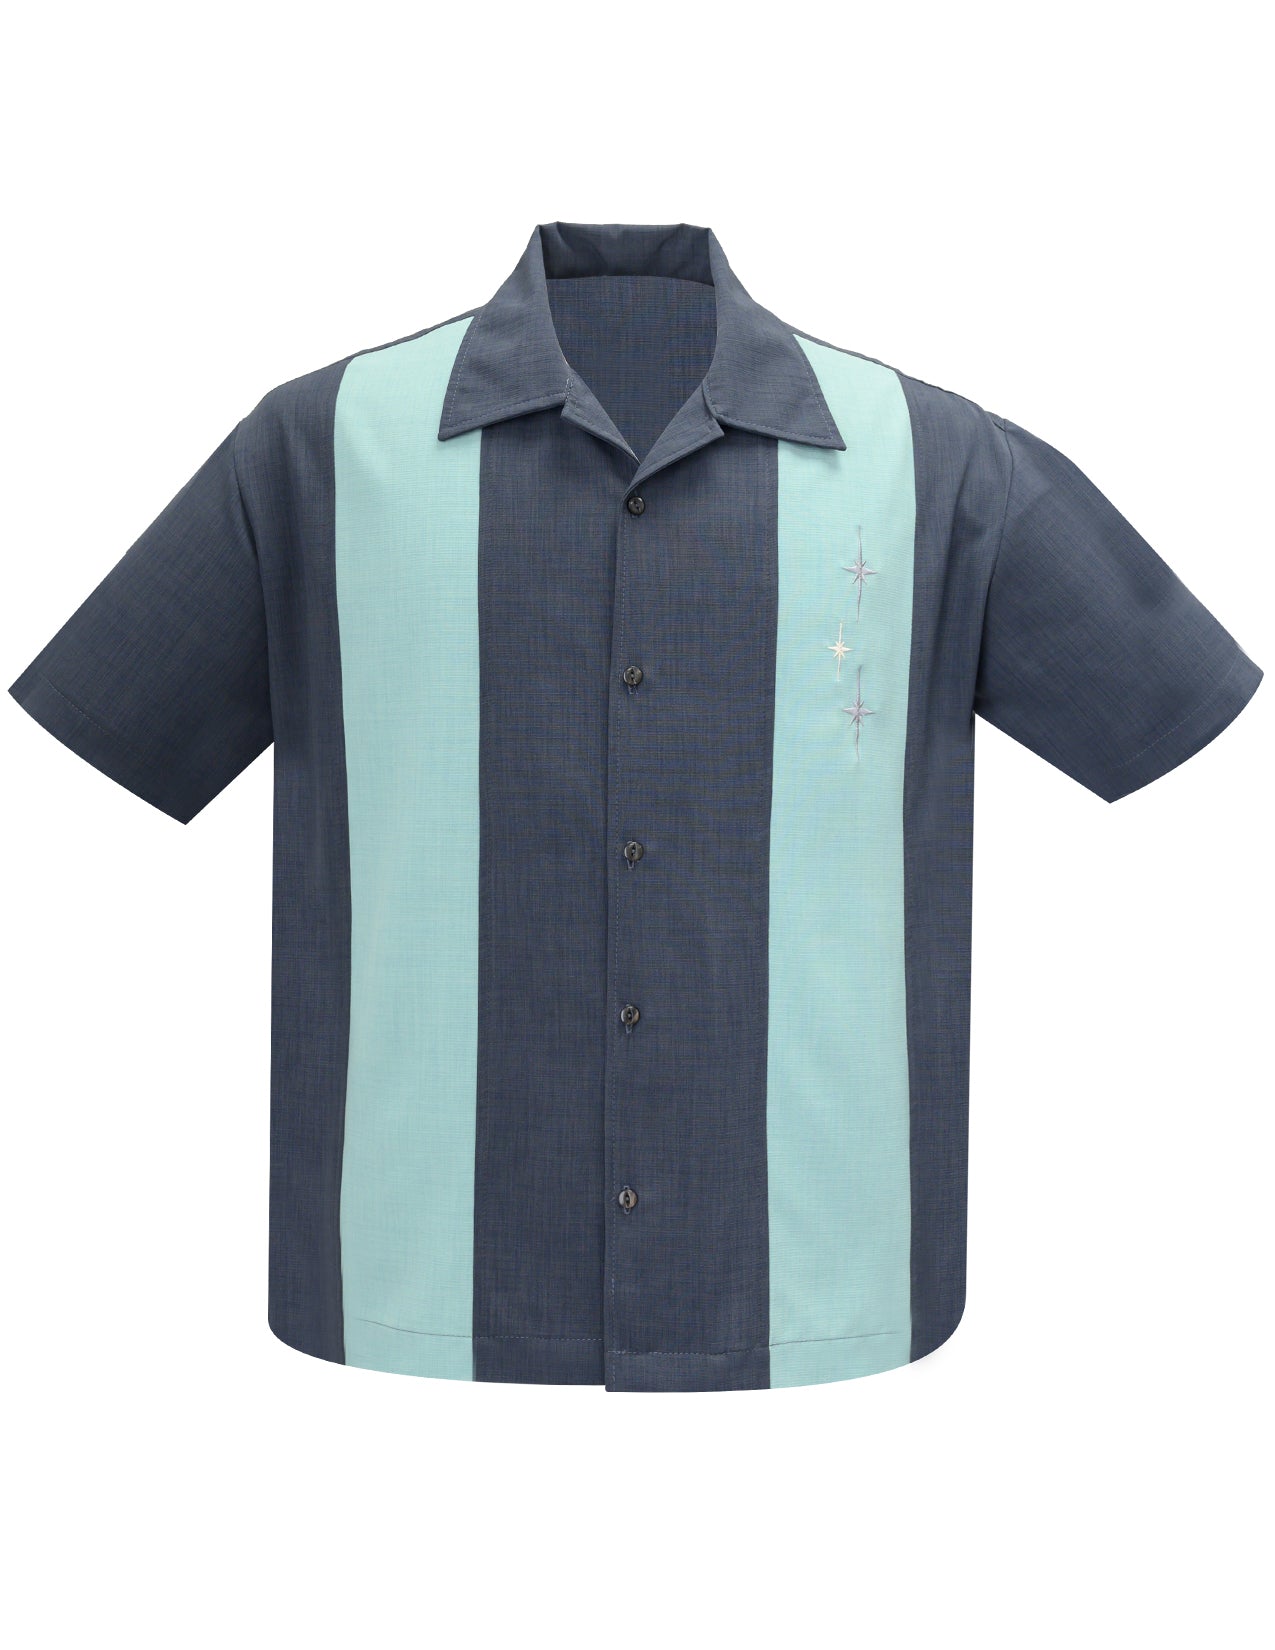 Three Star Panel Bowling Shirt in Charcoal